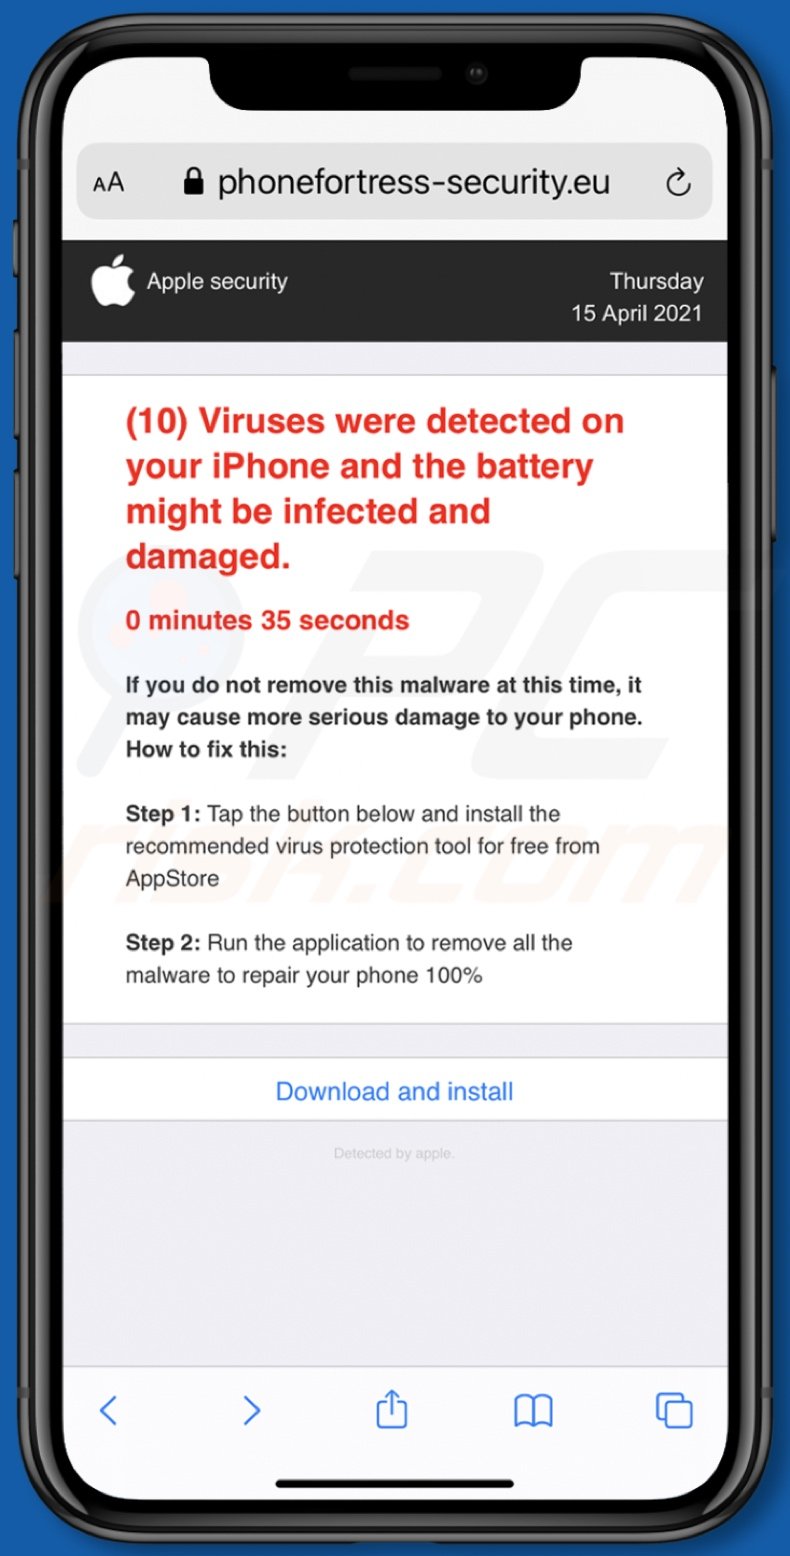 (10) Viruses were detected on your iPhone scam